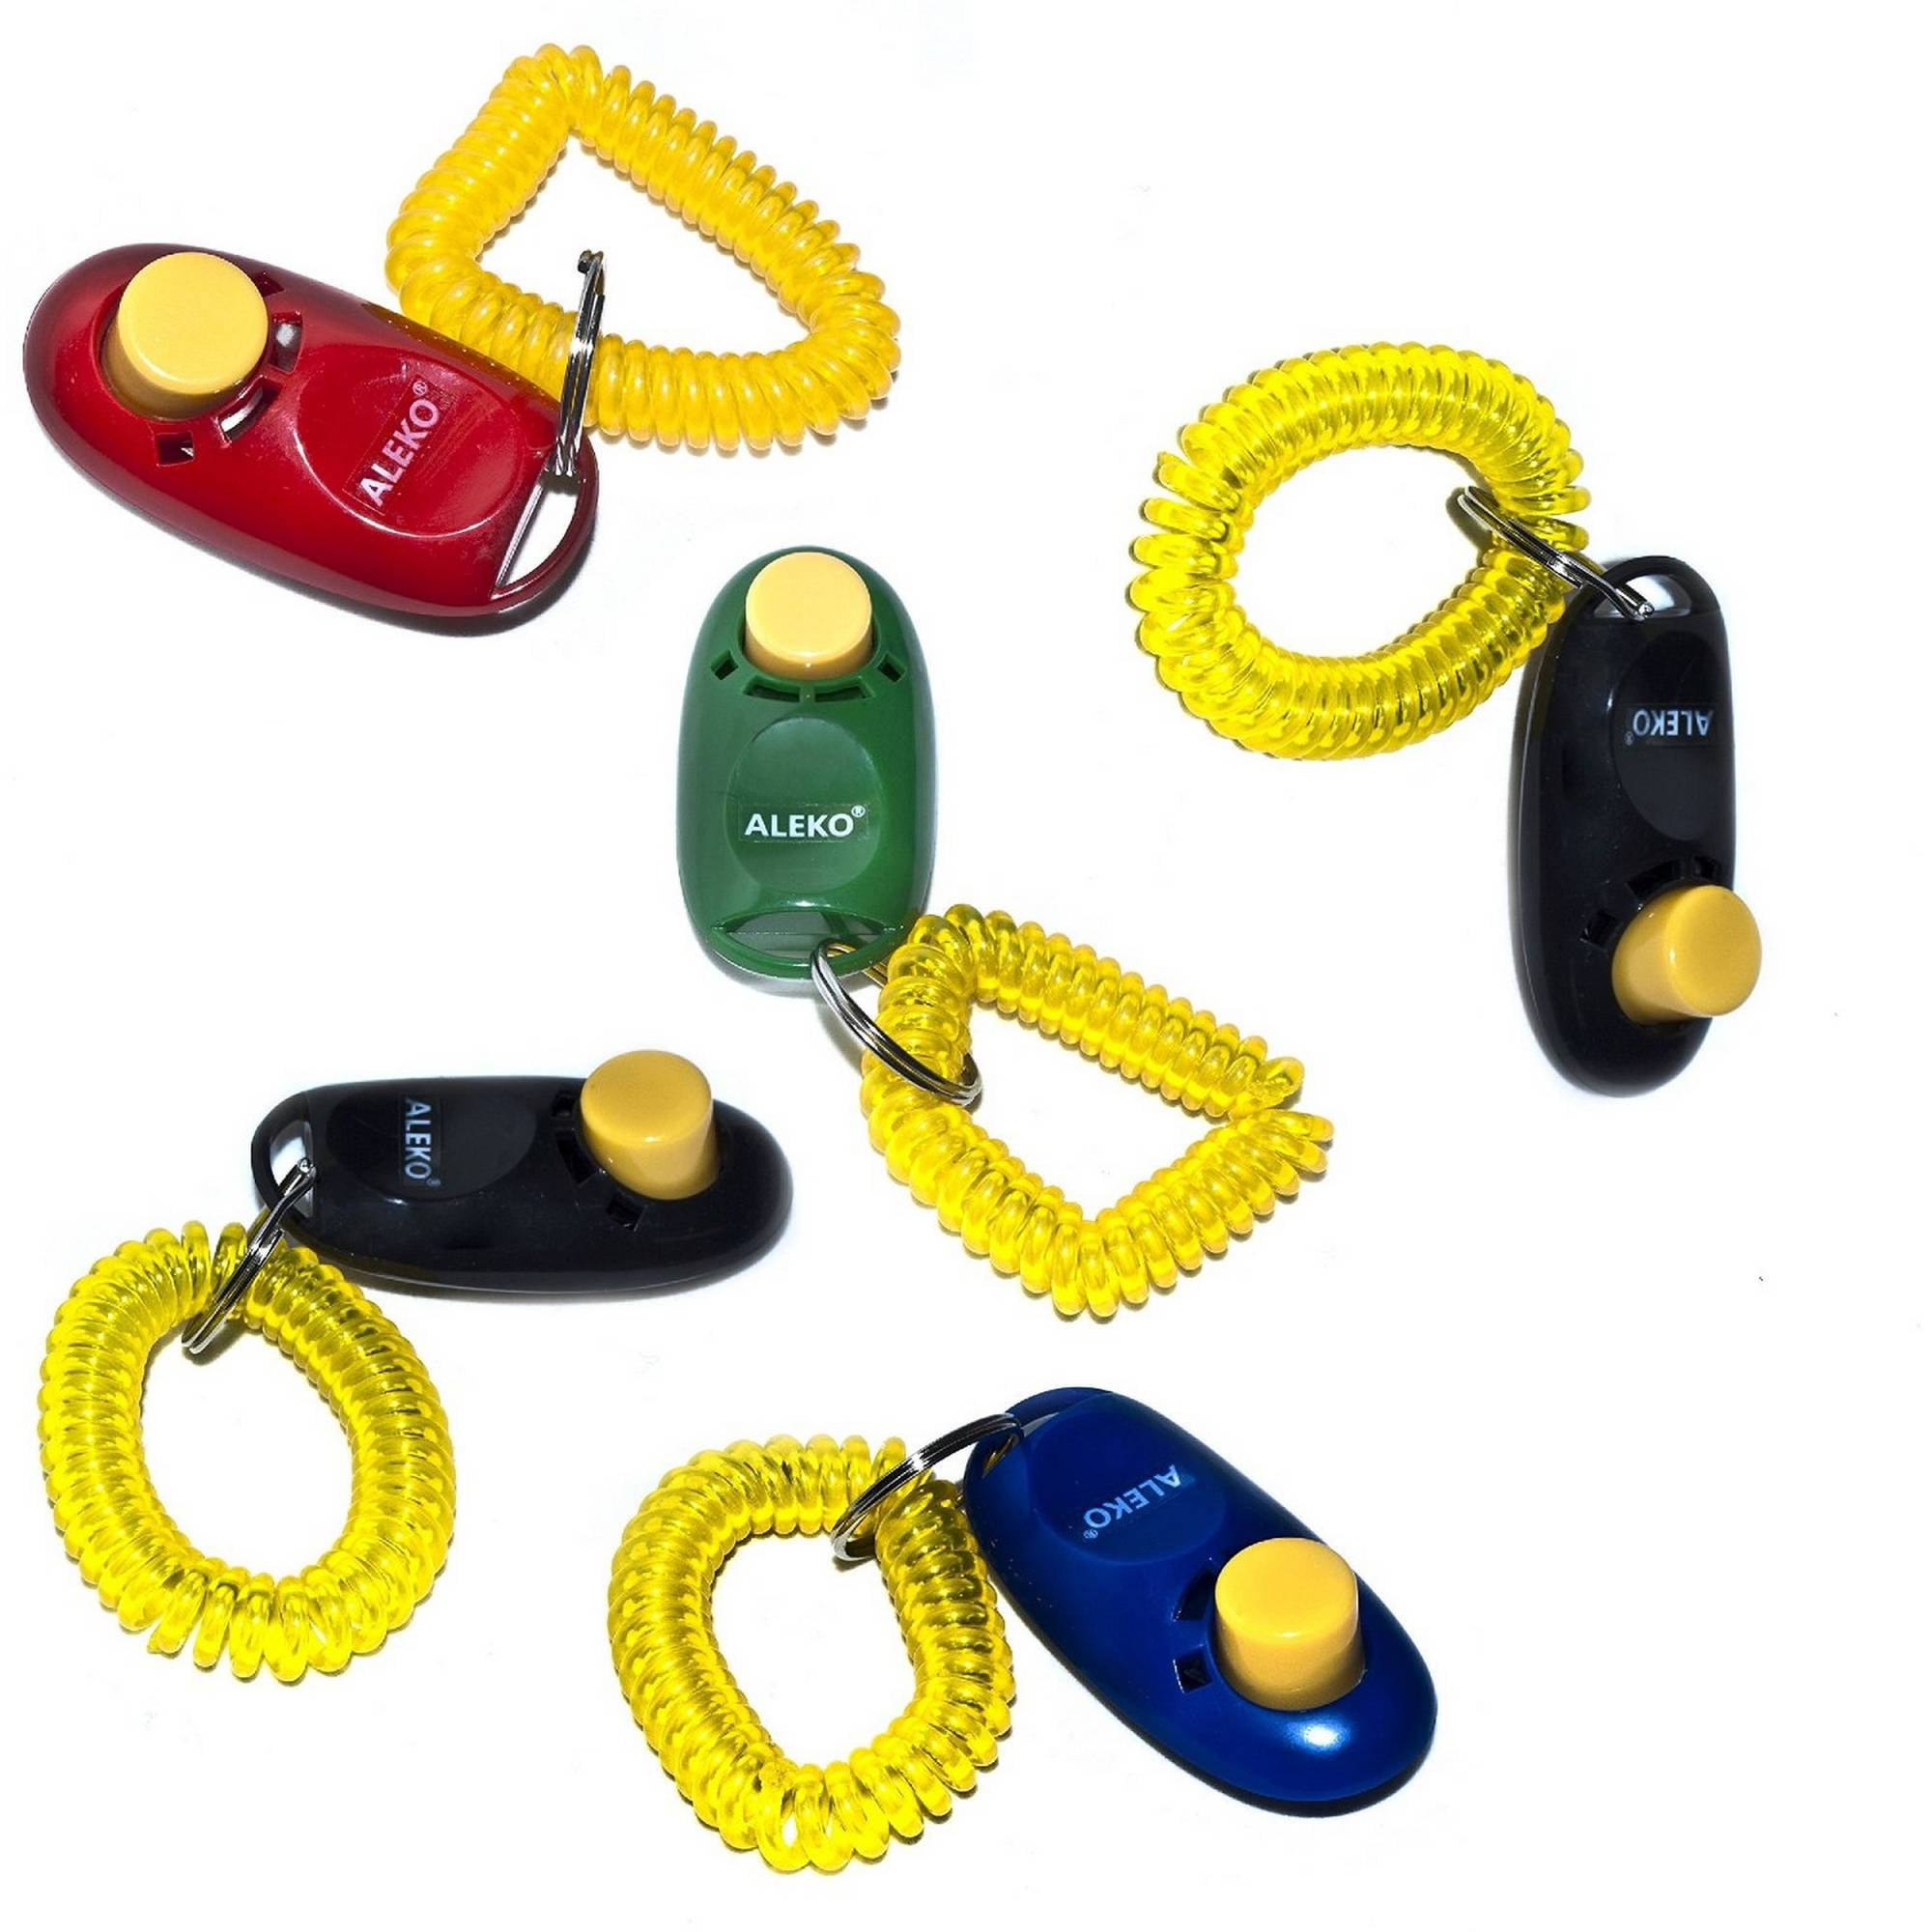 5ts-bc16-unb Dog Training Clicker, Multicolor - Pack Of 5